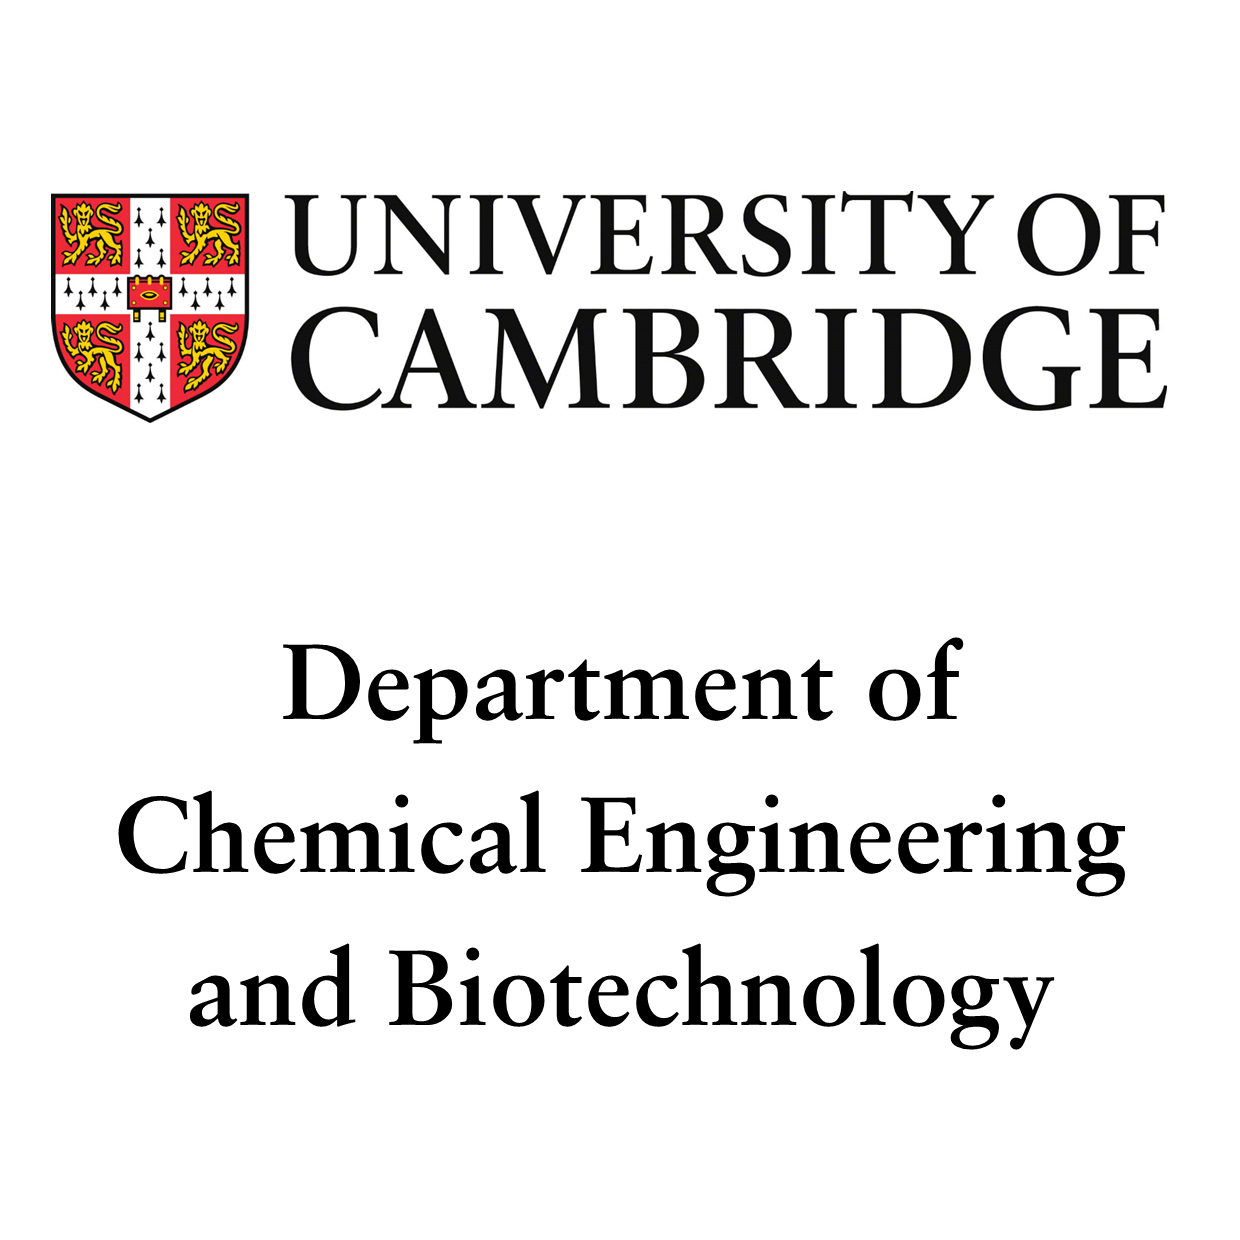 Physics at Work 2020 - Department of Chemical Engineering and Biotechnology, STORM's image